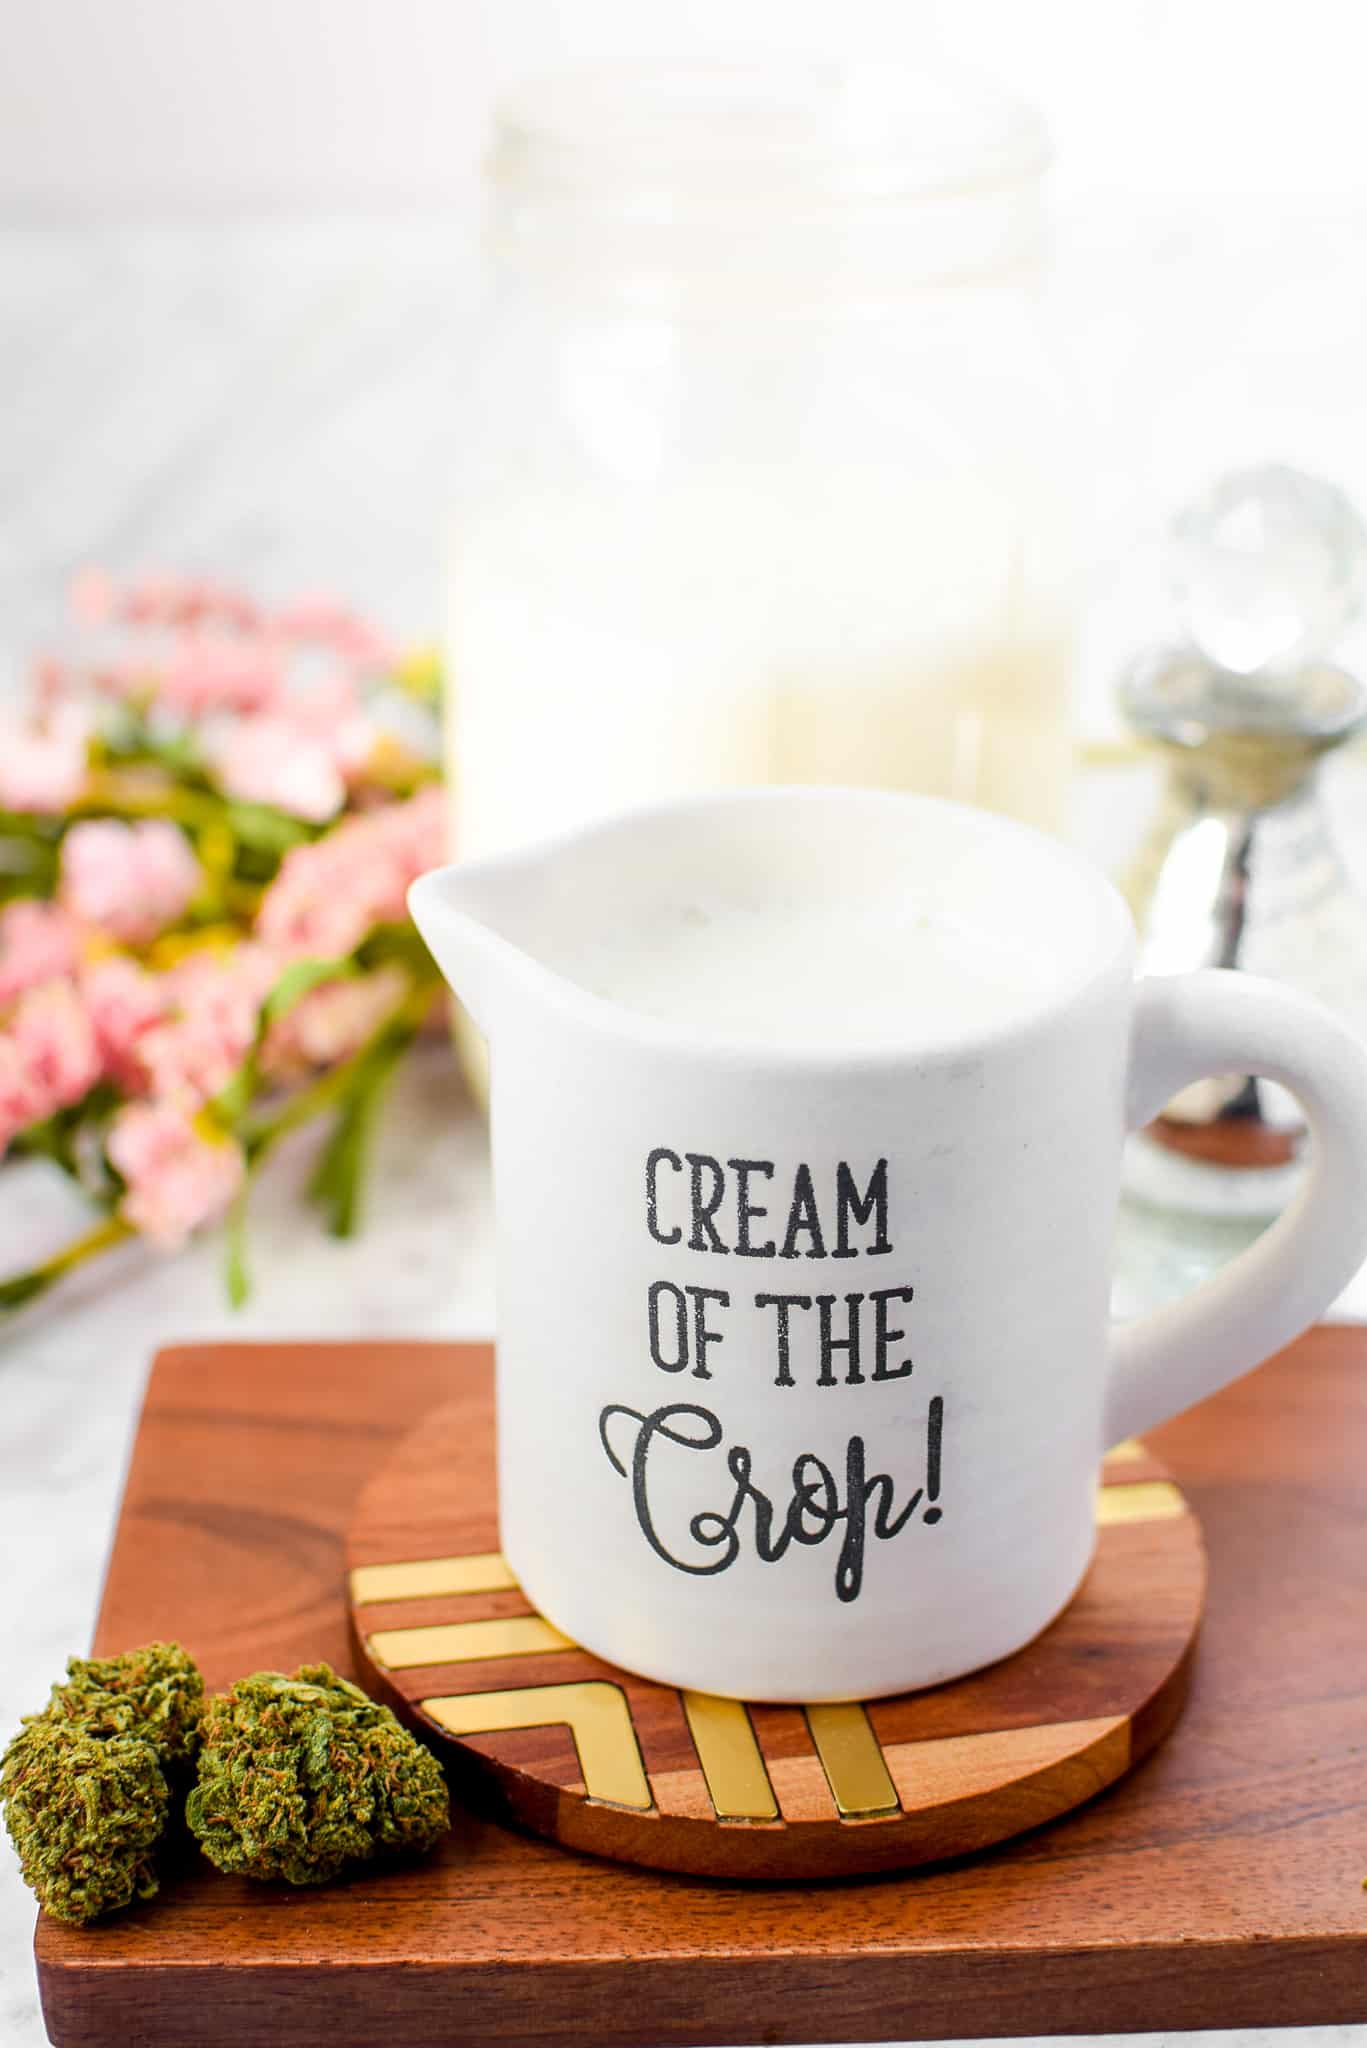 A picture of a cream container containing cannabis coffee creamer.